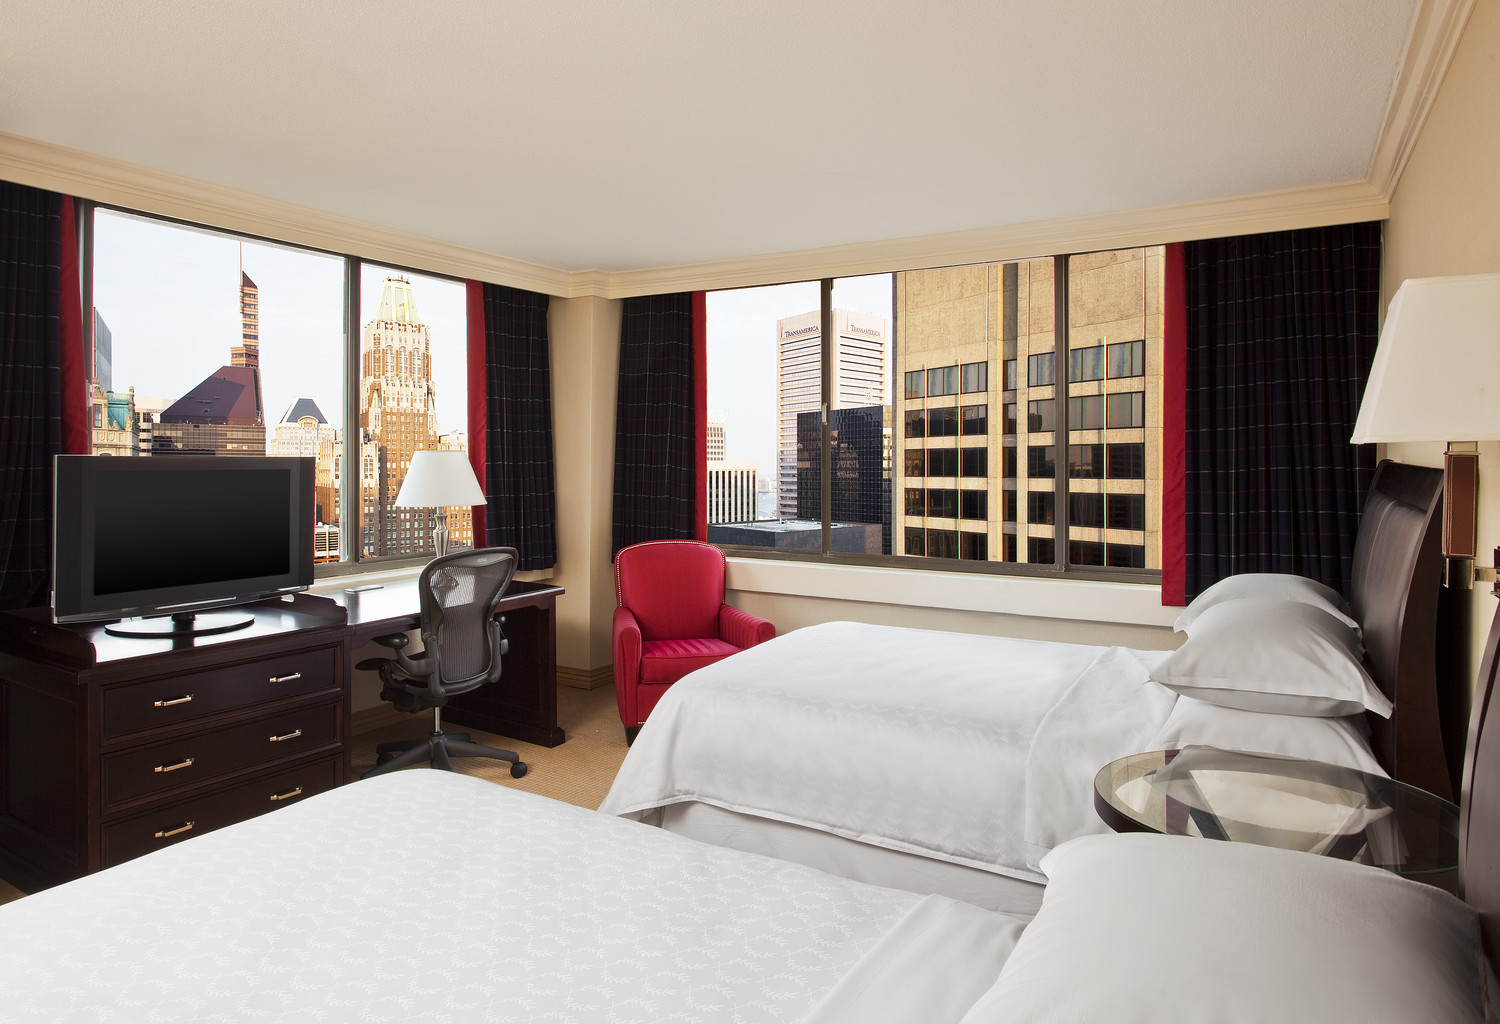 A guest room at the Radisson Baltimore Downtown - Inner Harbor. 